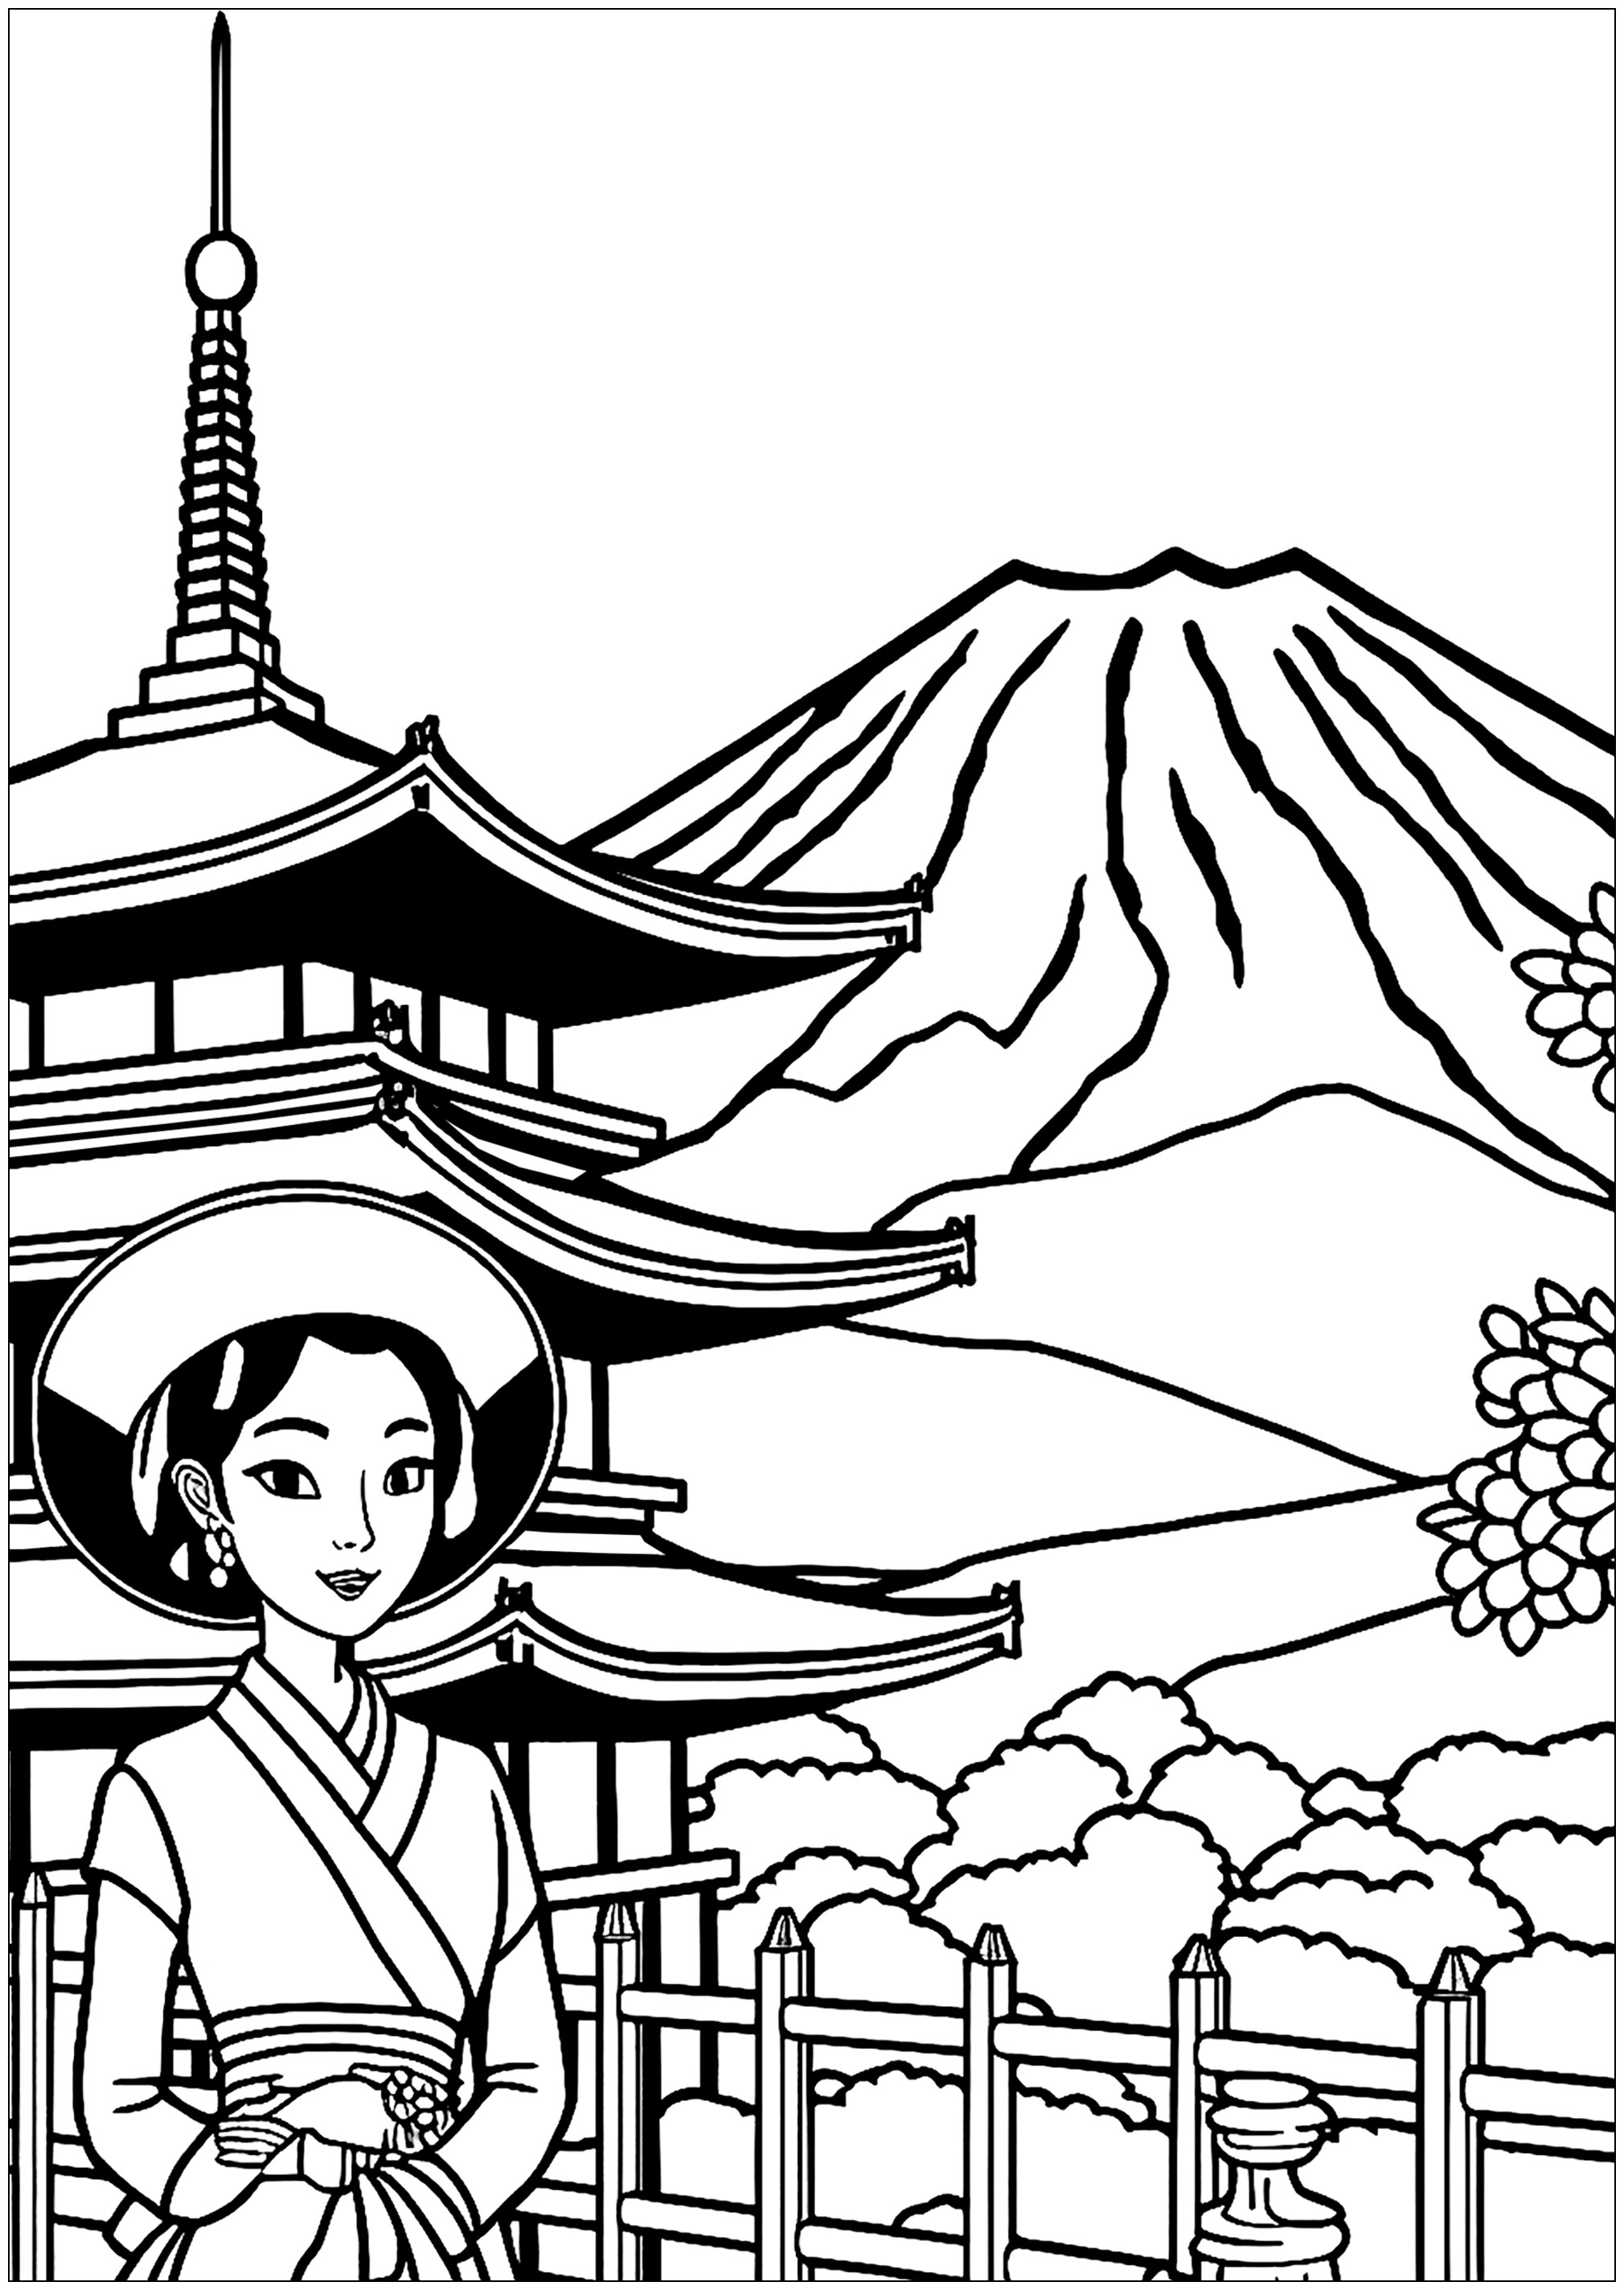 Geisha with a Japanese temple and Mount Fuji